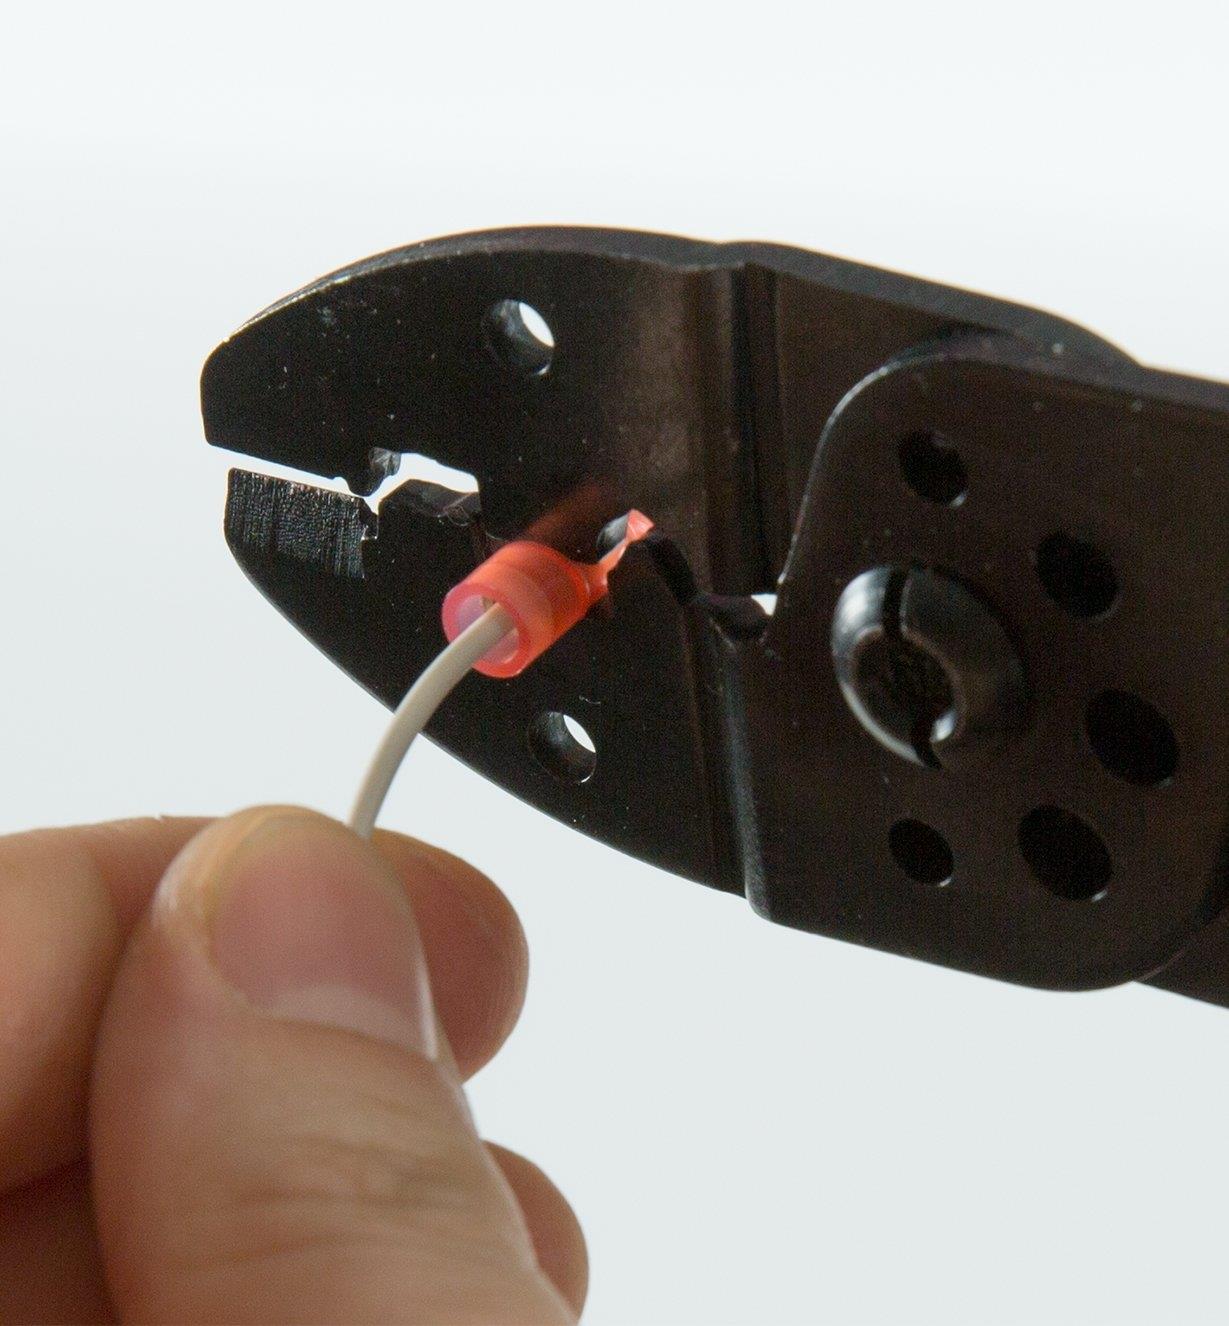 Crimping the connection with a wire crimper